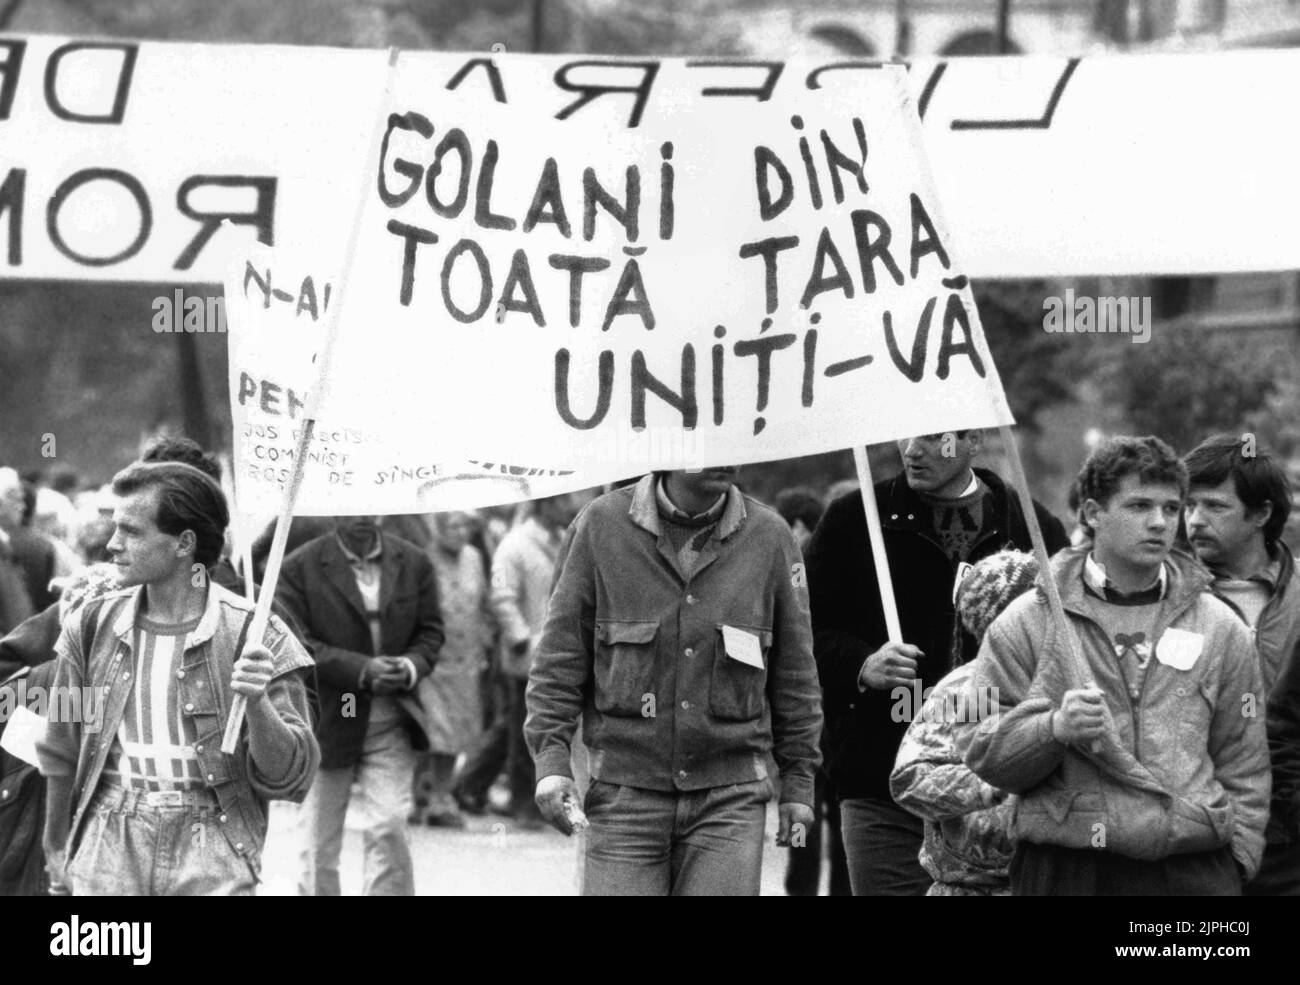 Bucharest, Romania, April 1990. 'Golaniada', a major anti-communism protest  in the University Square following the Romanian Revolution of 1989. People would gather daily to protest the ex-communists that grabbed the power after the Revolution. As president Iliescu called them 'golani' (hooligans), the protesters proudly adopted the term, and wore it as a badge. This people are holding a banner saying 'Hooligans of the country, unite!' Stock Photo